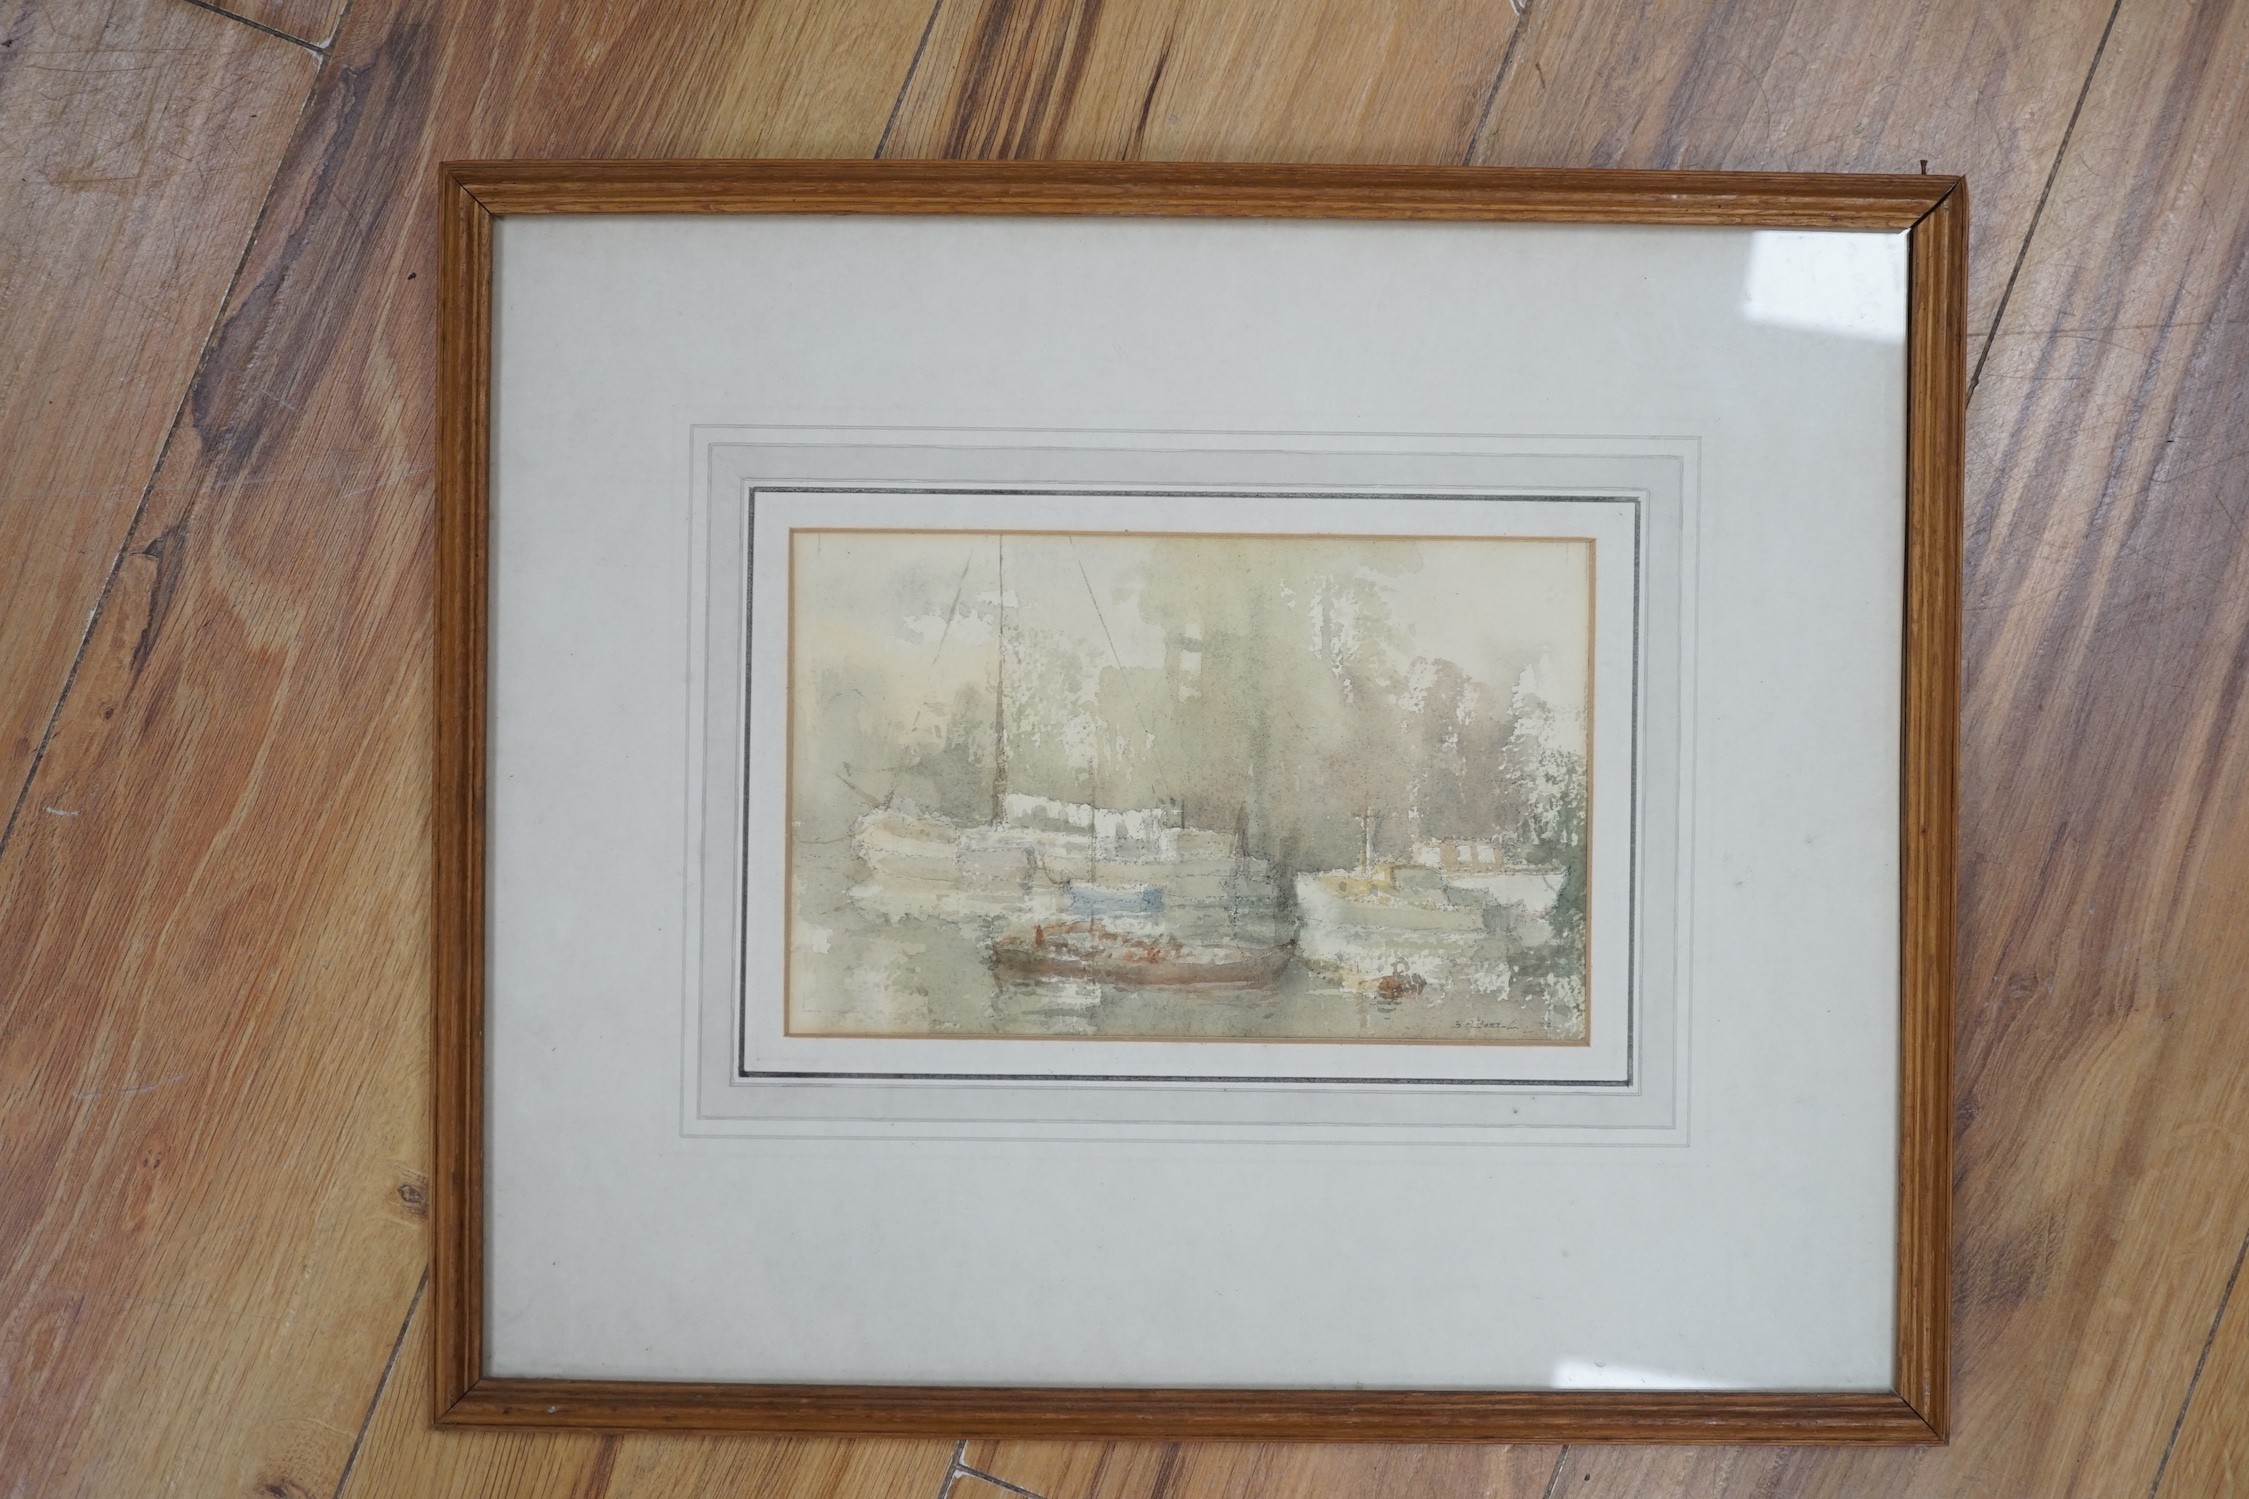 Bernard Philip Batchelor (1924-), watercolour, 'Misty morning on the Thames', signed and dated '72, 14 x 22cm